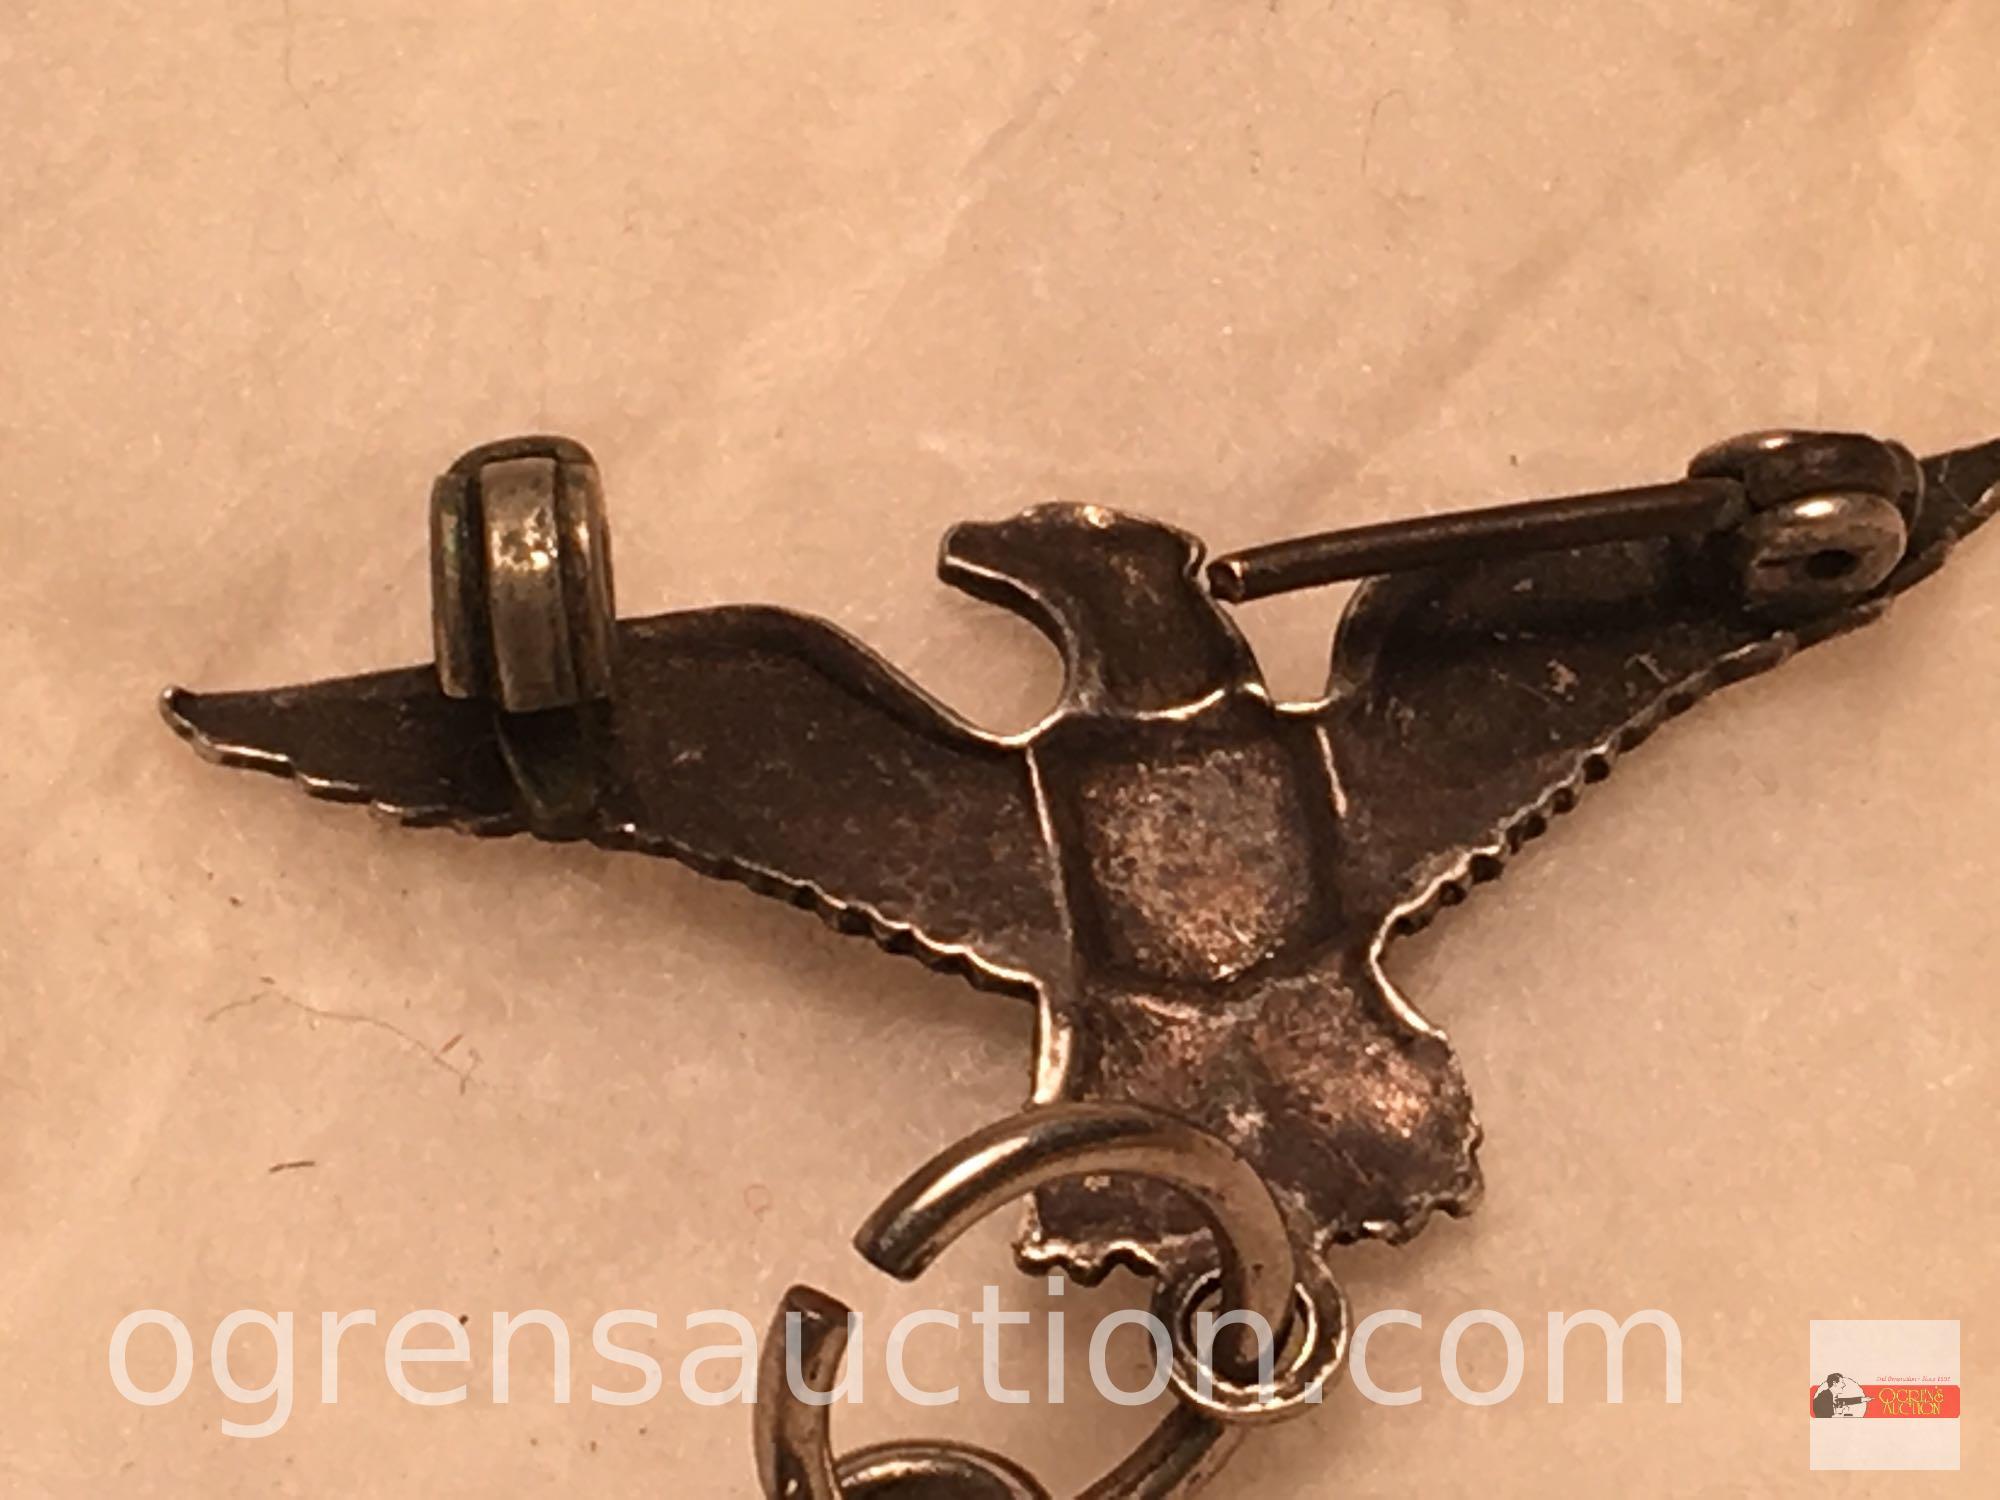 Jewelry - 2 sterling - Military eagle and dragonfly w/stone